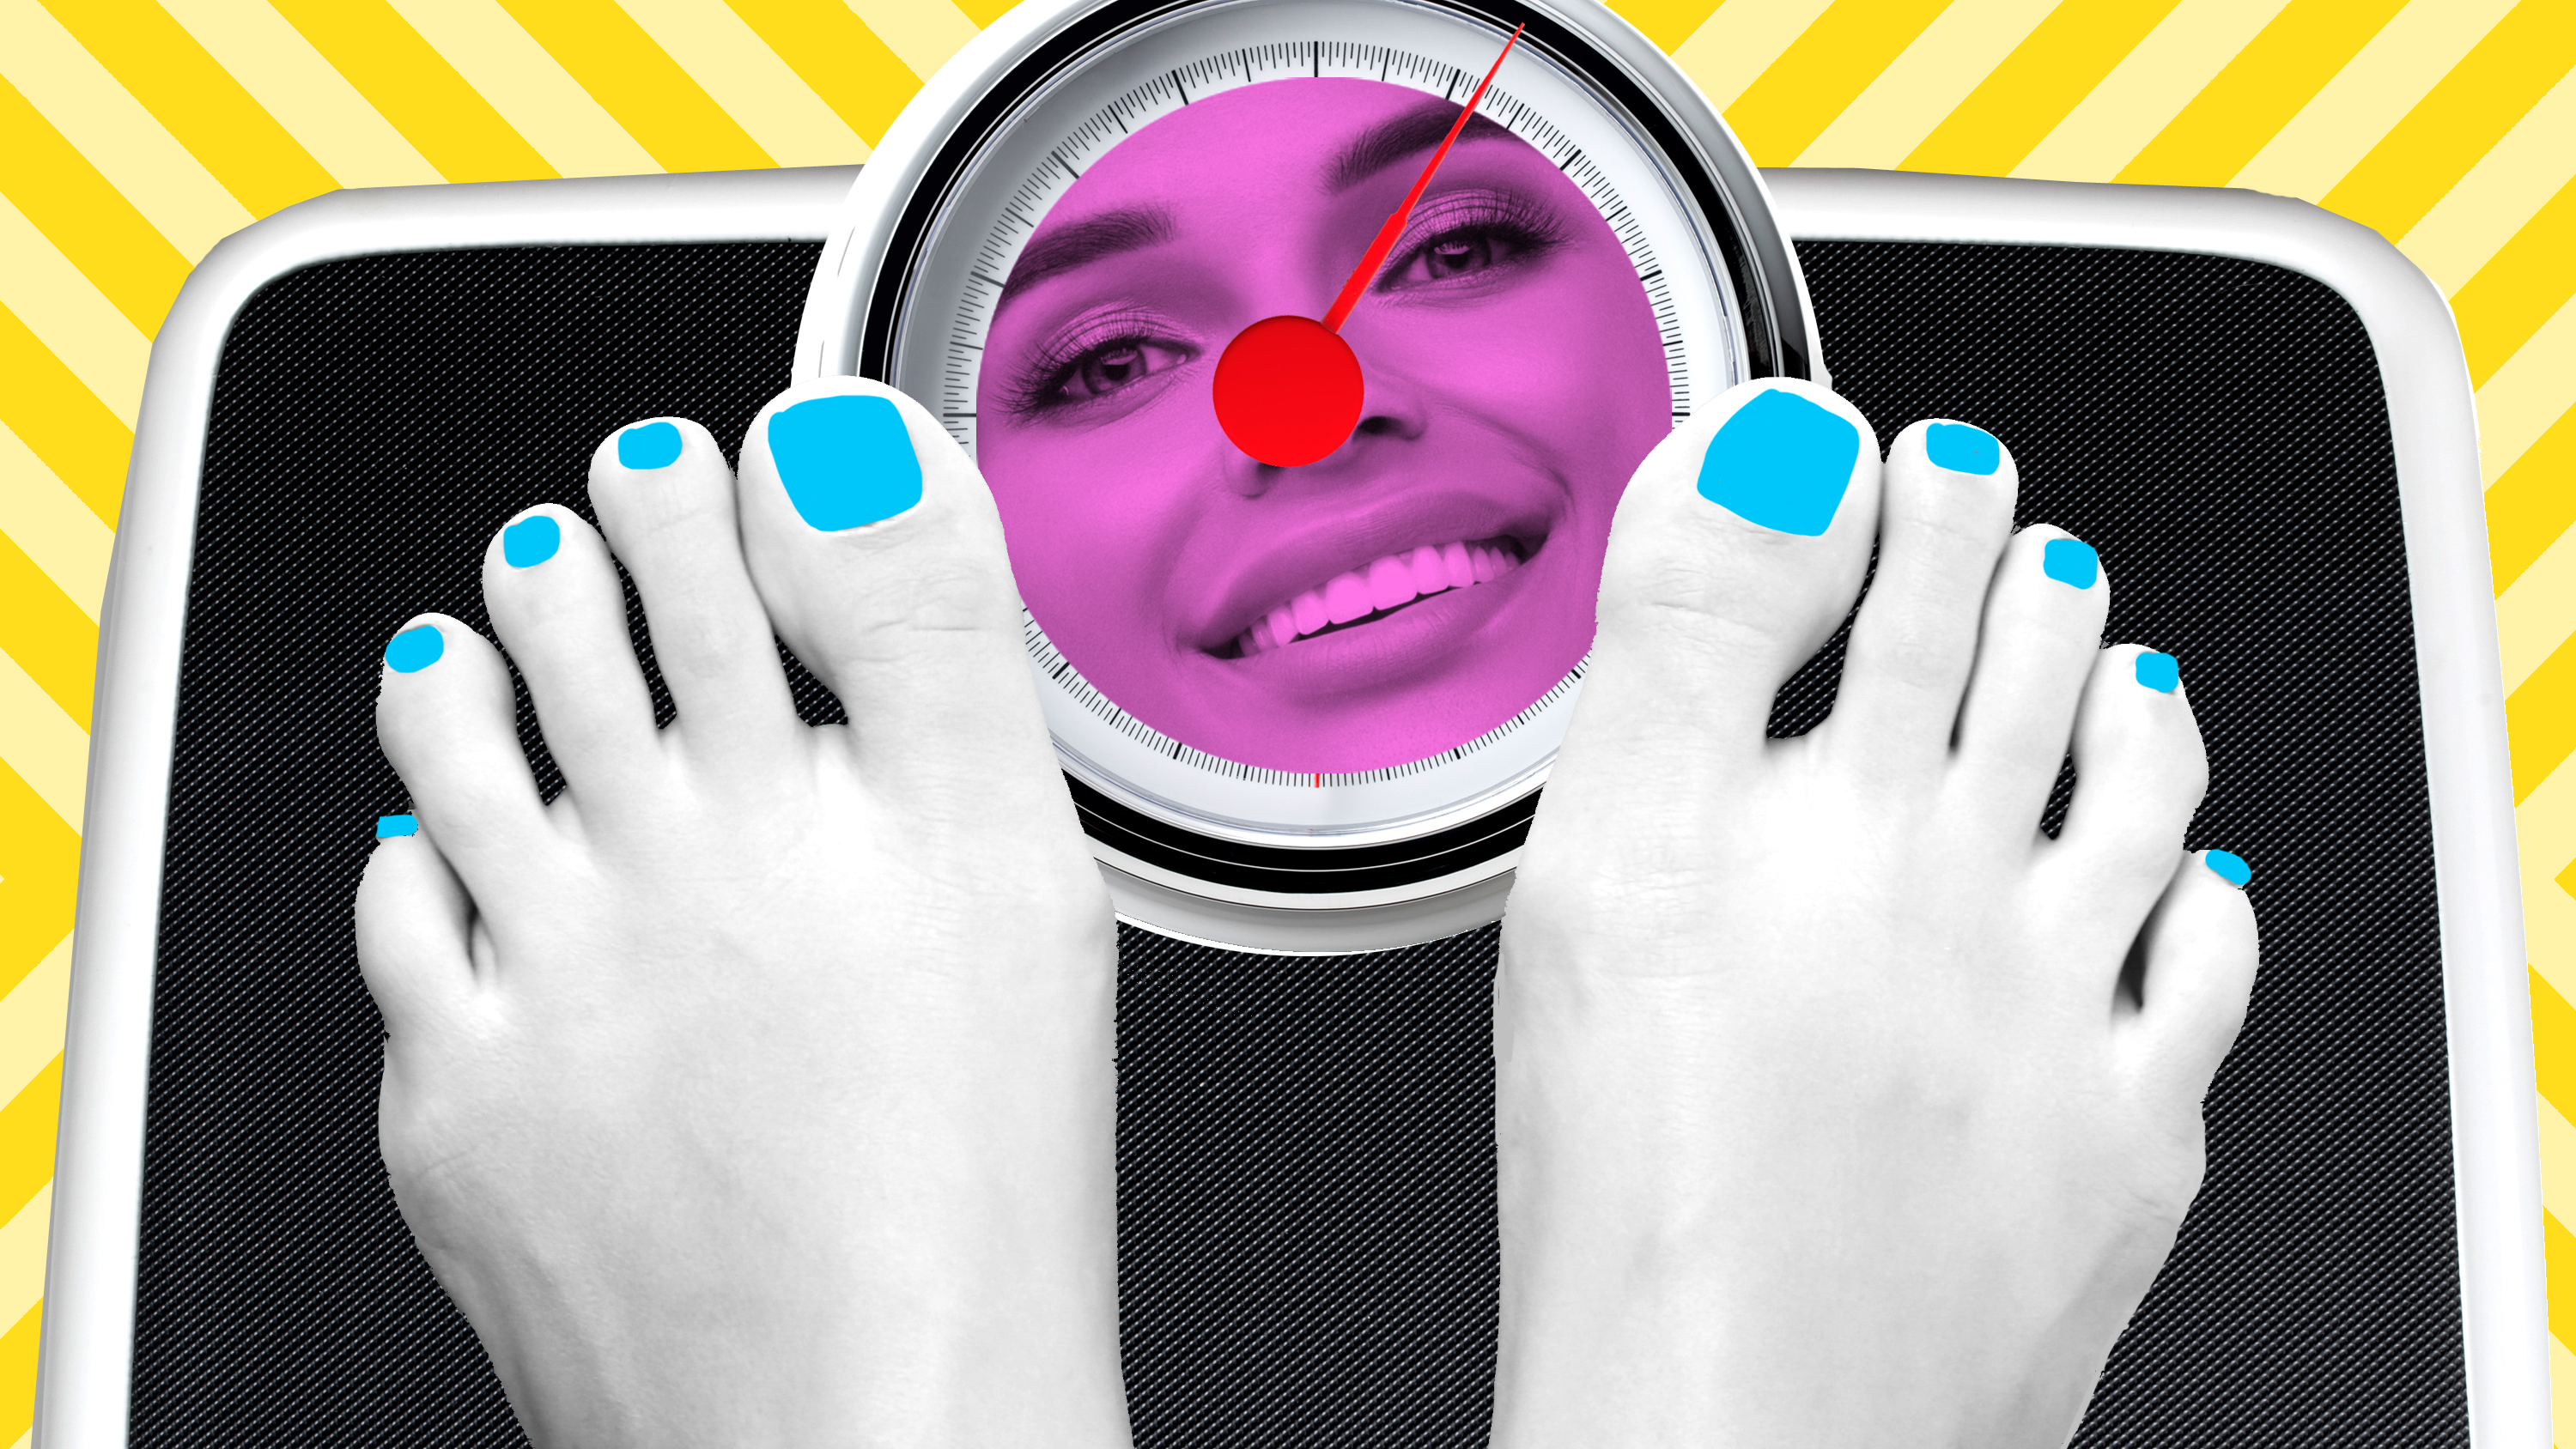 illustration of feet on a scale with a smiling face in the dial which resemble a needle